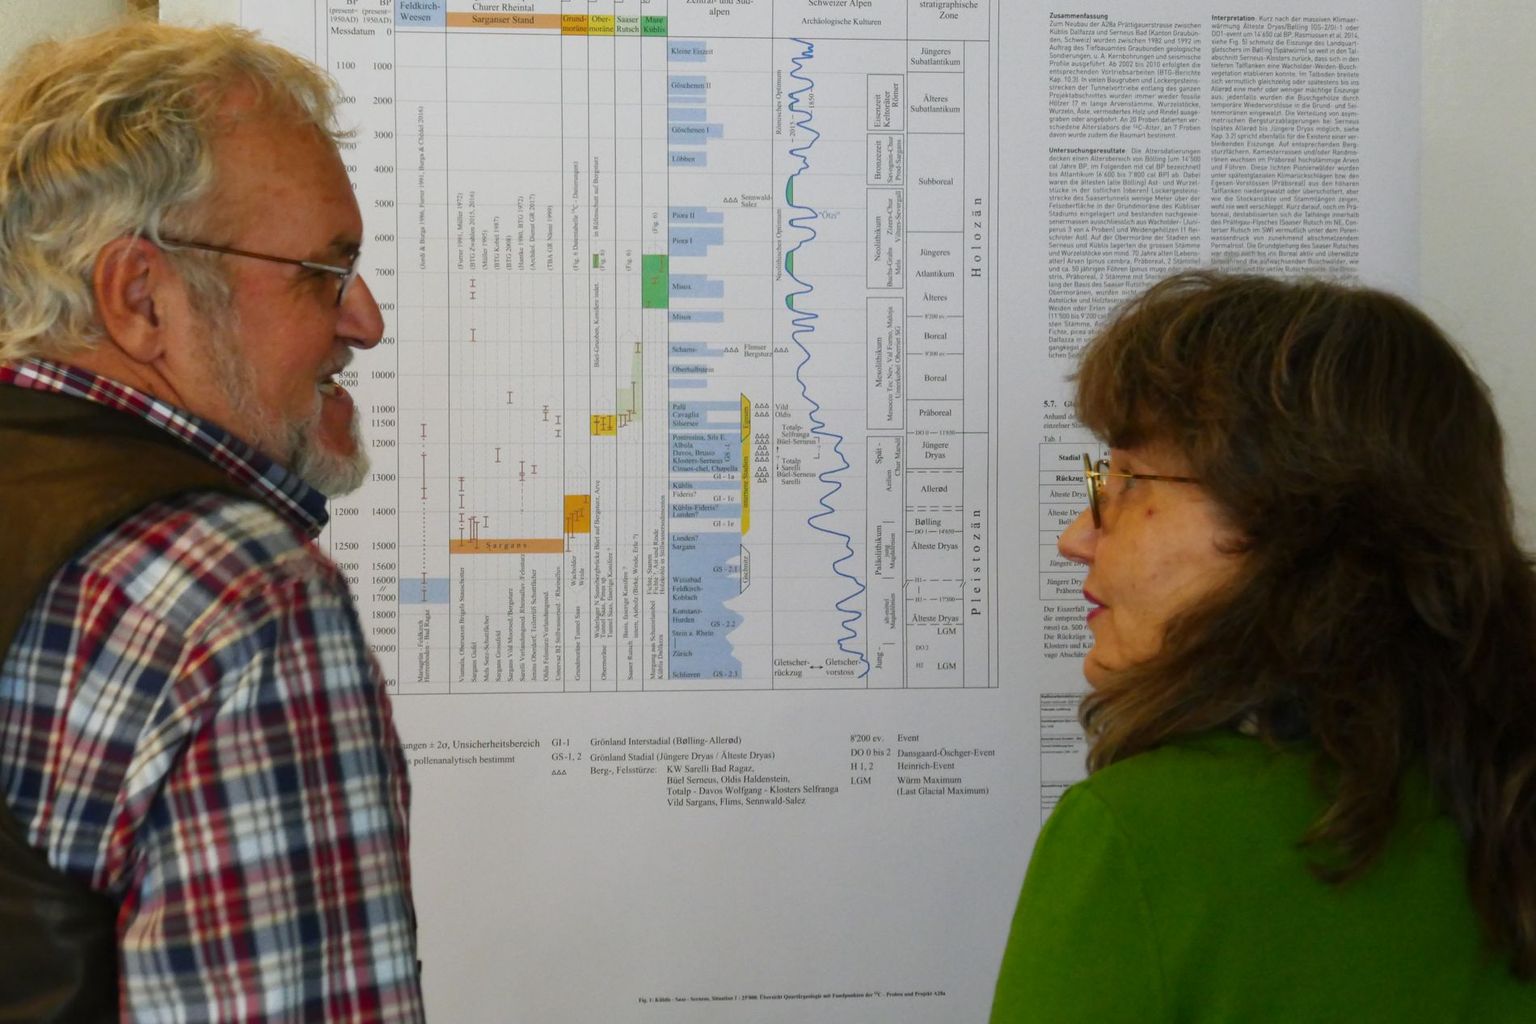 CH-QUAT Meeting 2019: poster discussions